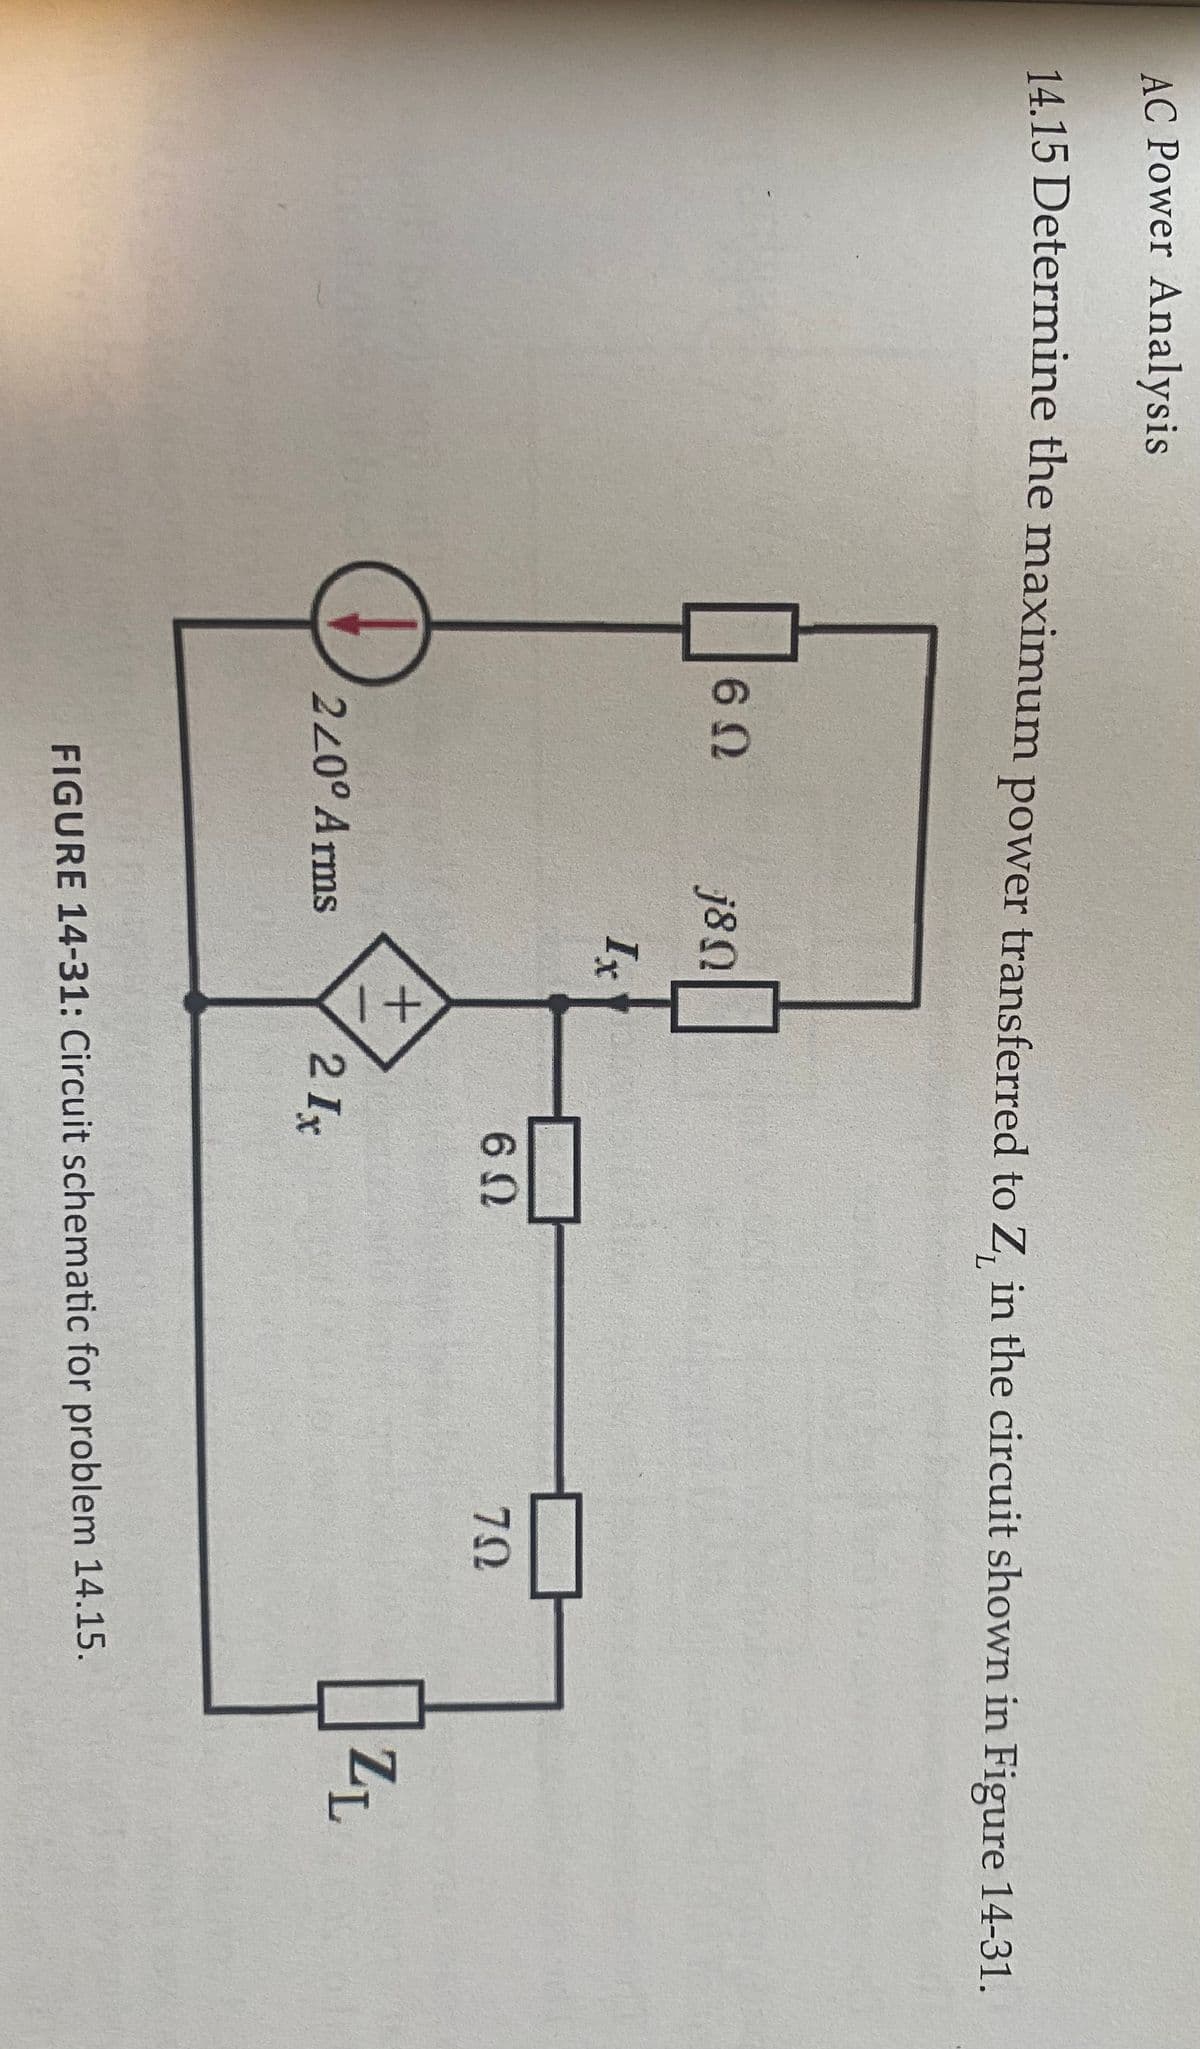 AC Power Analysis
14.15 Determine the maximum power transferred to Z, in the circuit shown in Figure 14-31.
j8N
Ix
ZL
2L0° Arms
2 Ix
FIGURE 14-31: Circuit schematic for problem 14.15.
